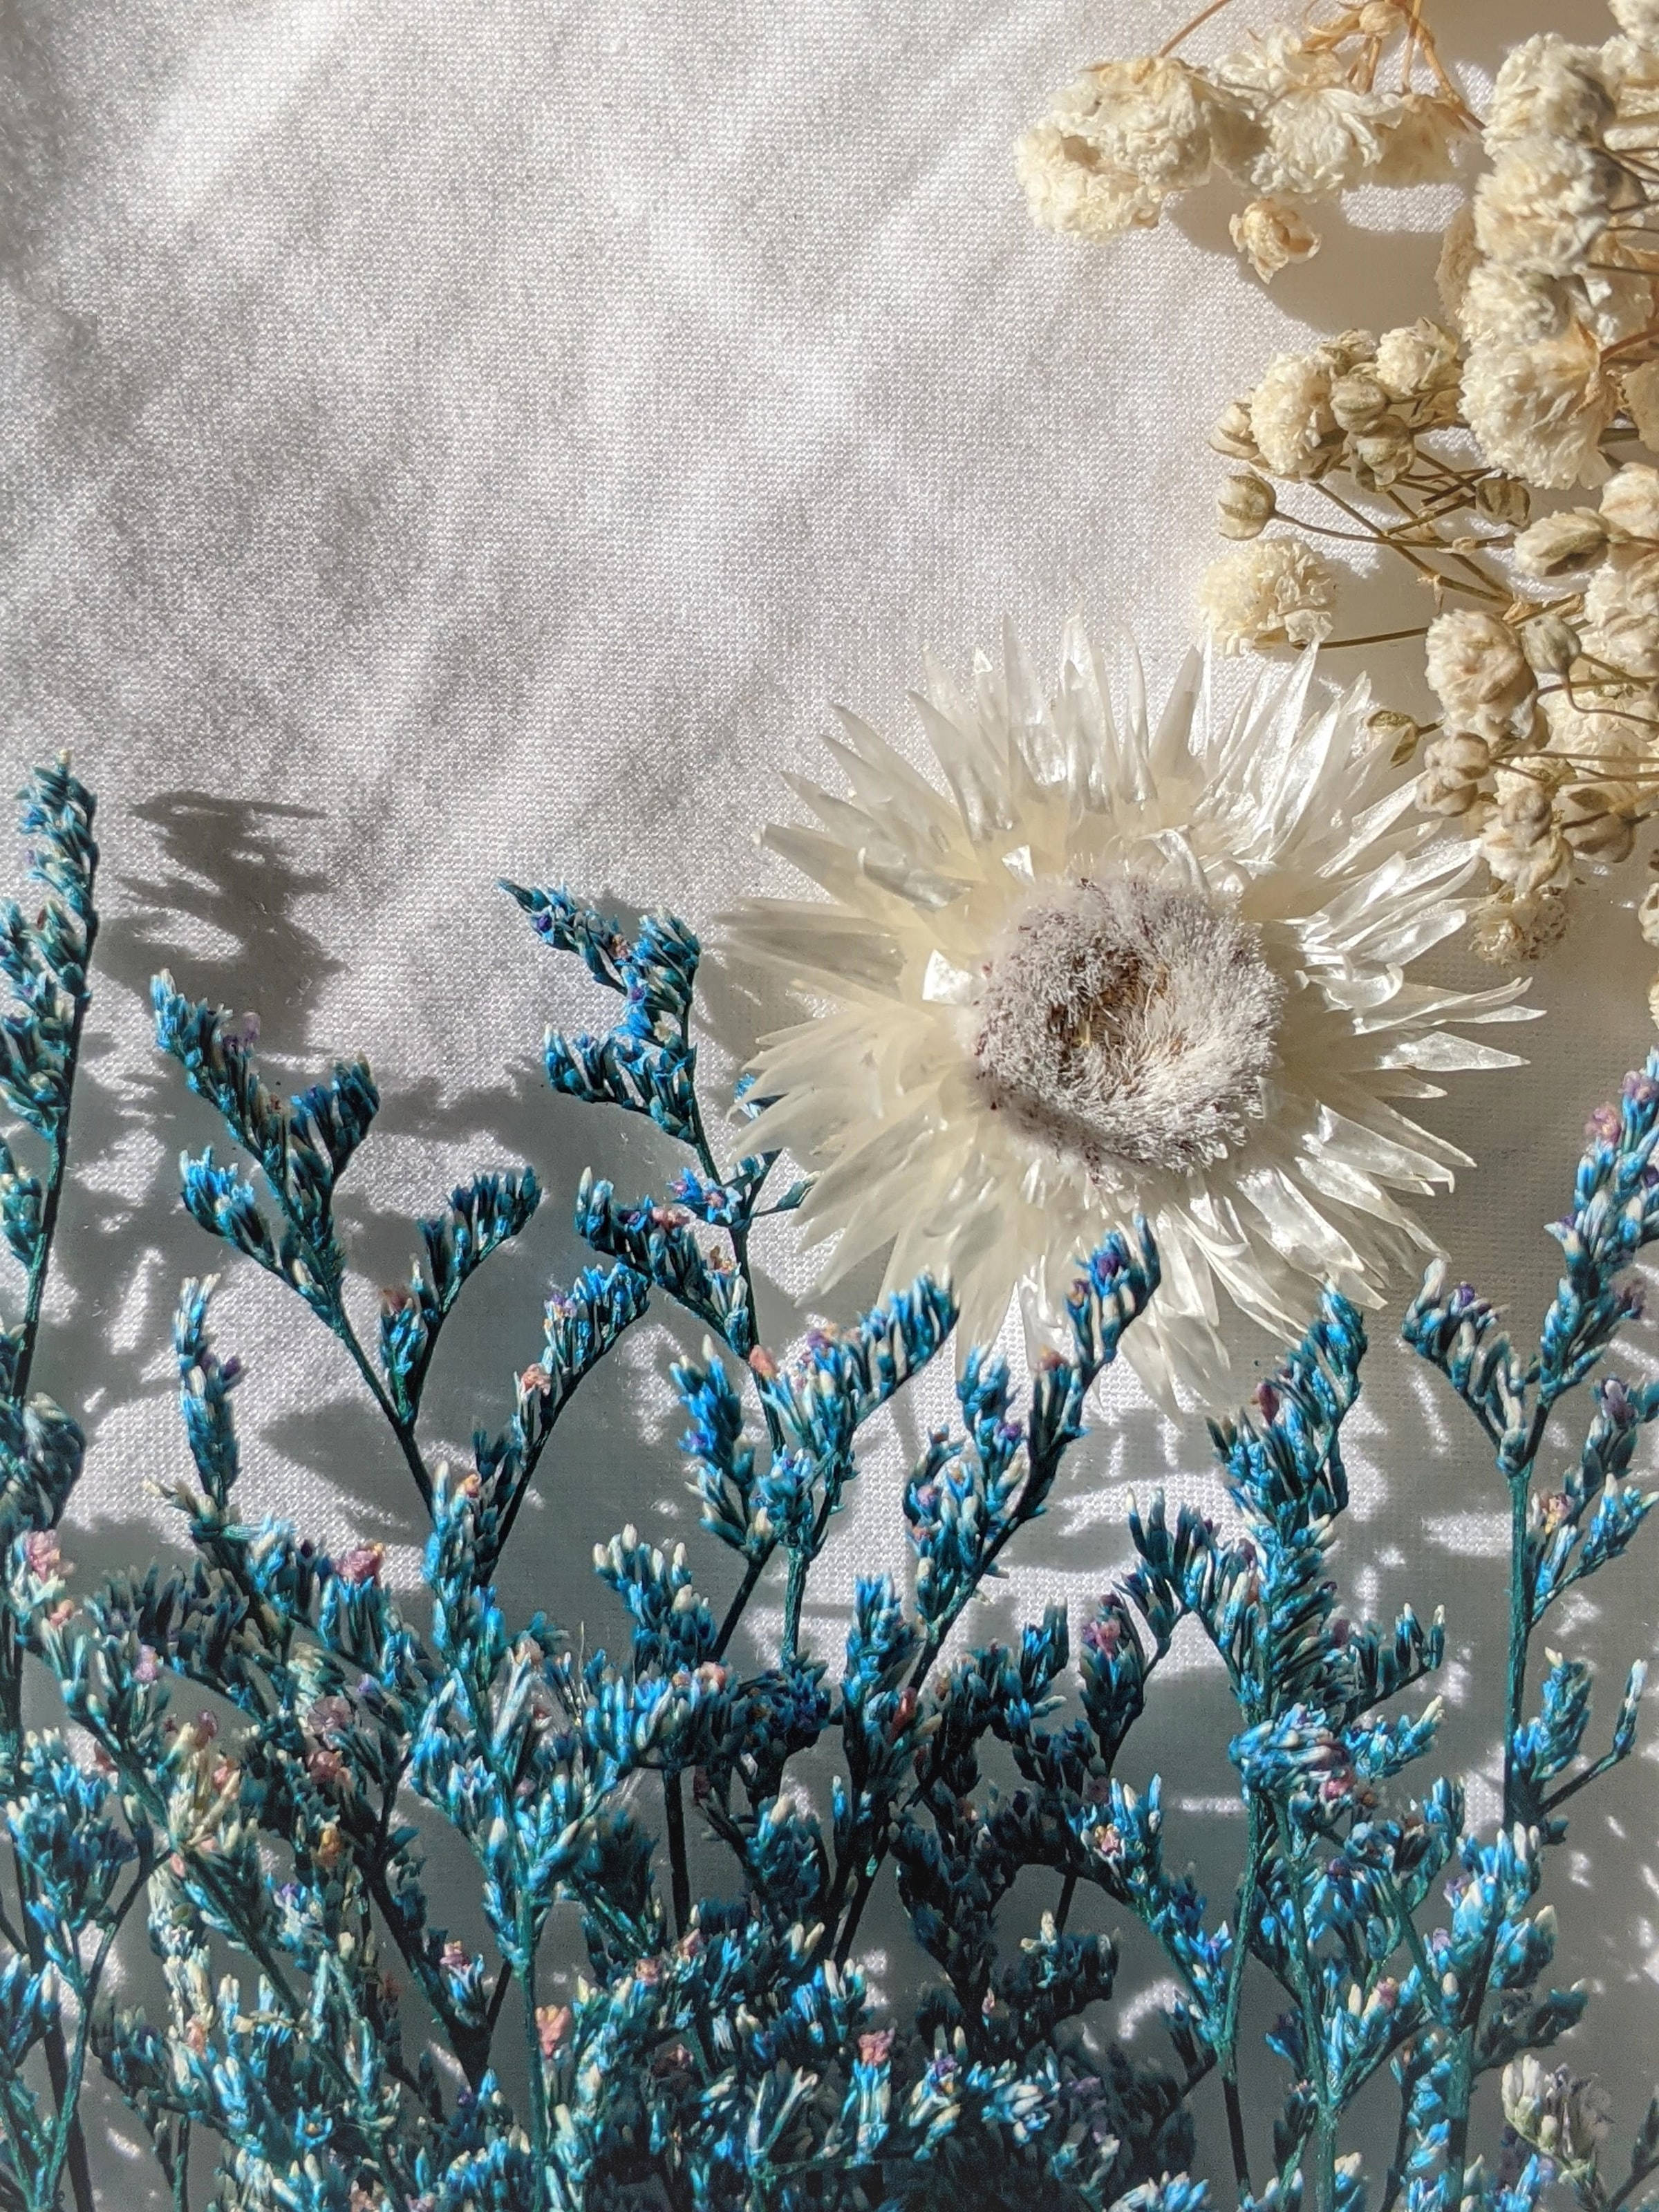 Cute Blue Aesthetic Dried Grass And Flowers